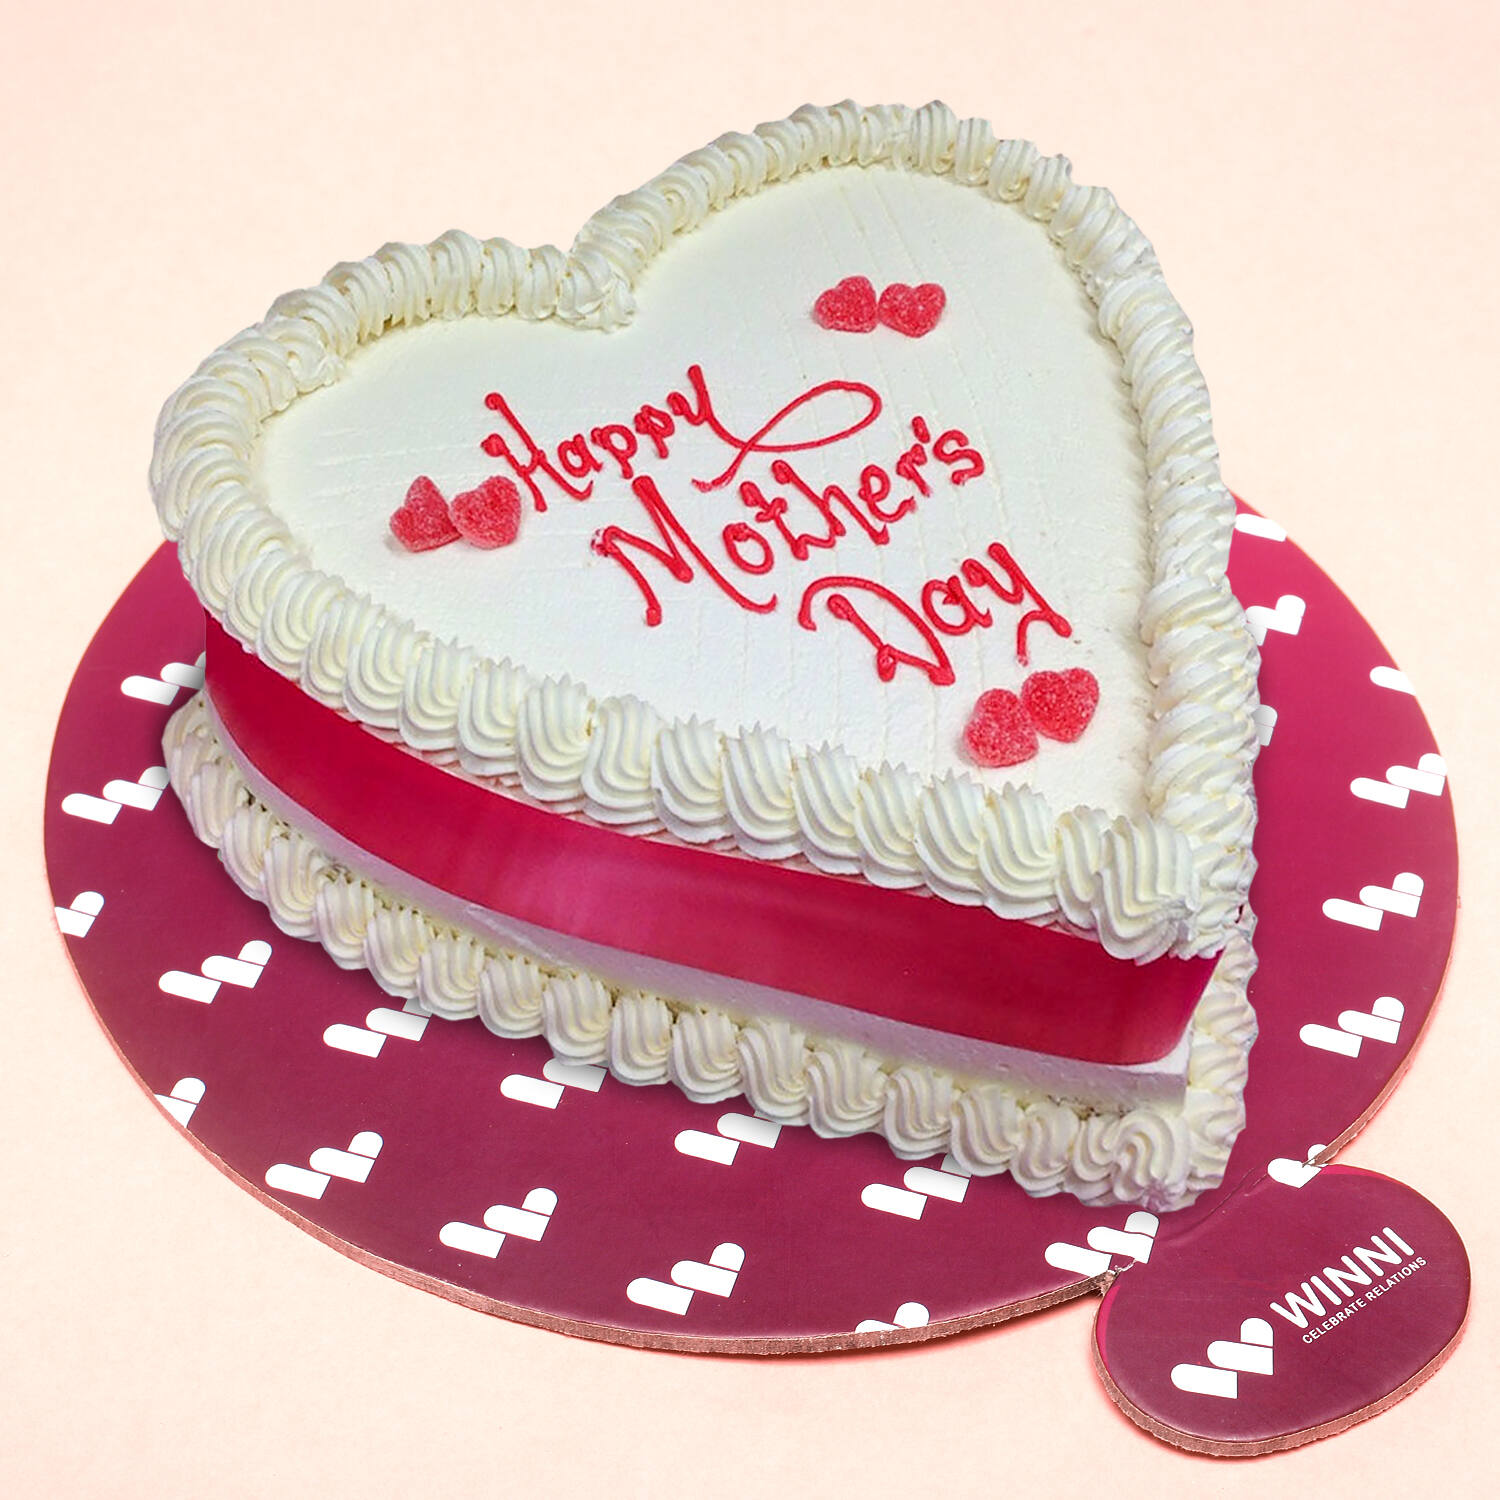 Order Mothers Day SpeciaPhoto Cake Online Free Shipping in Delhi, NCR,  Bangalore,Jaipur | Delhi NCR